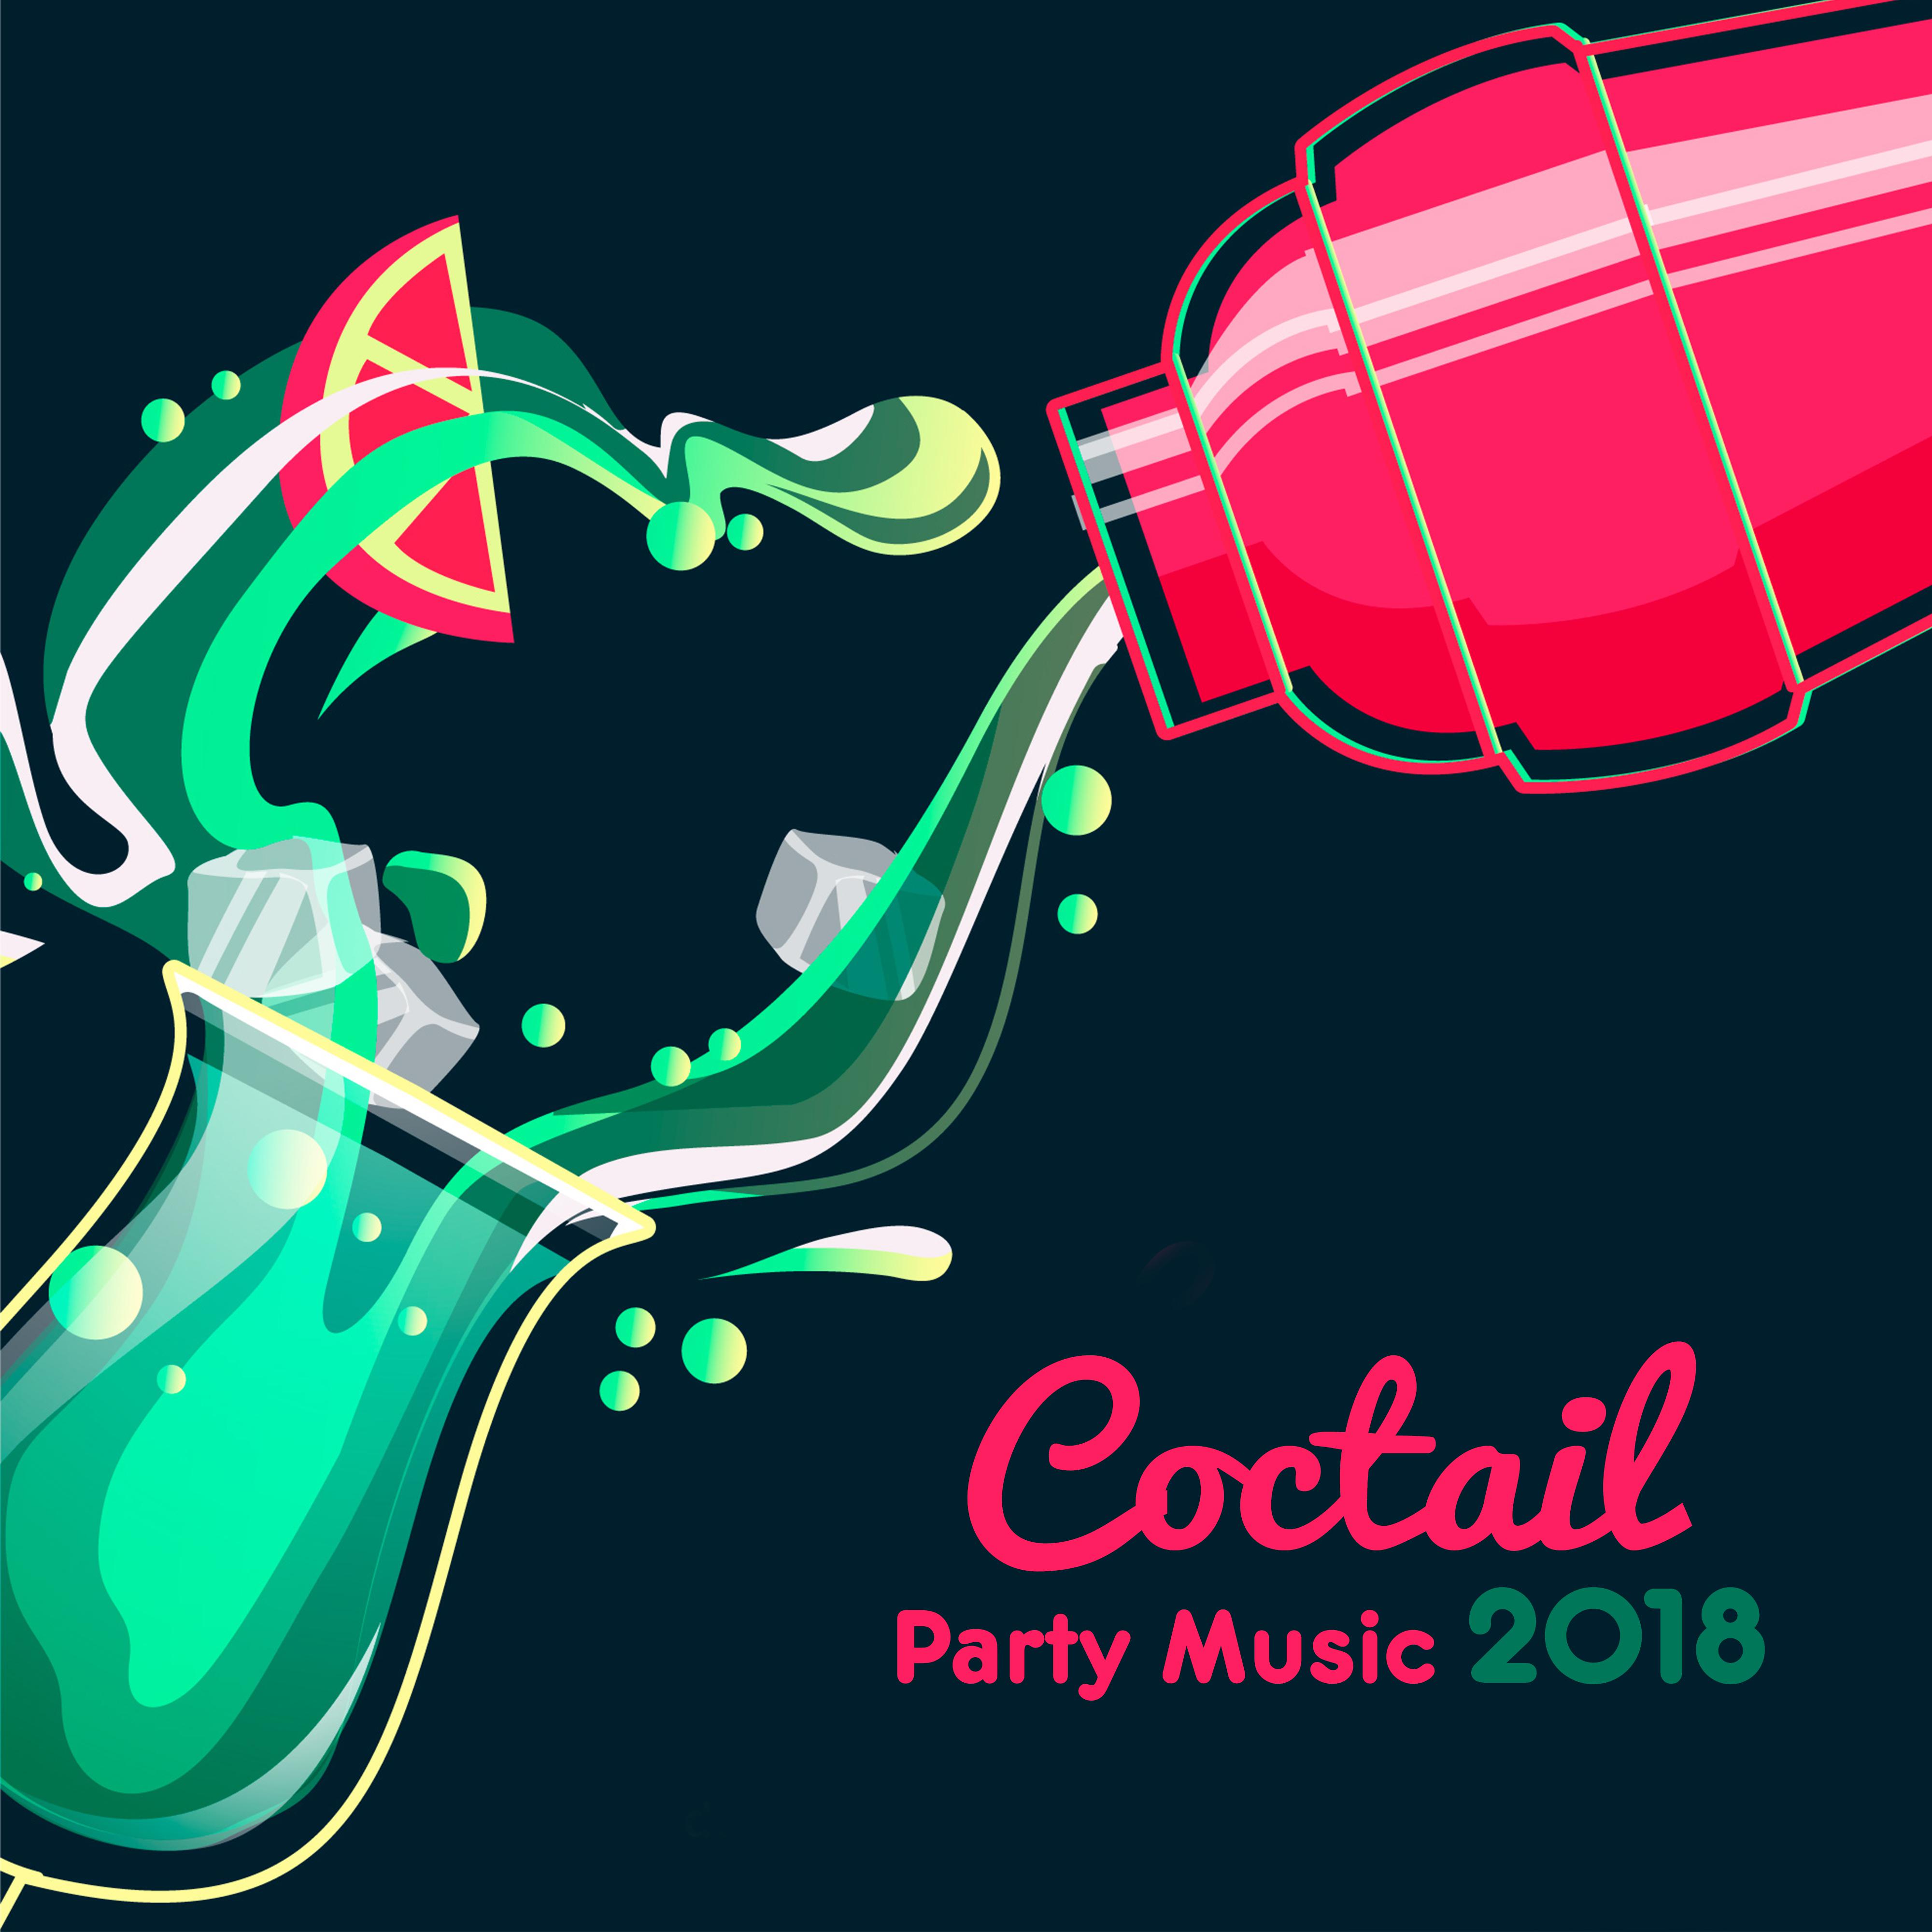 Coctail Party Music 2018